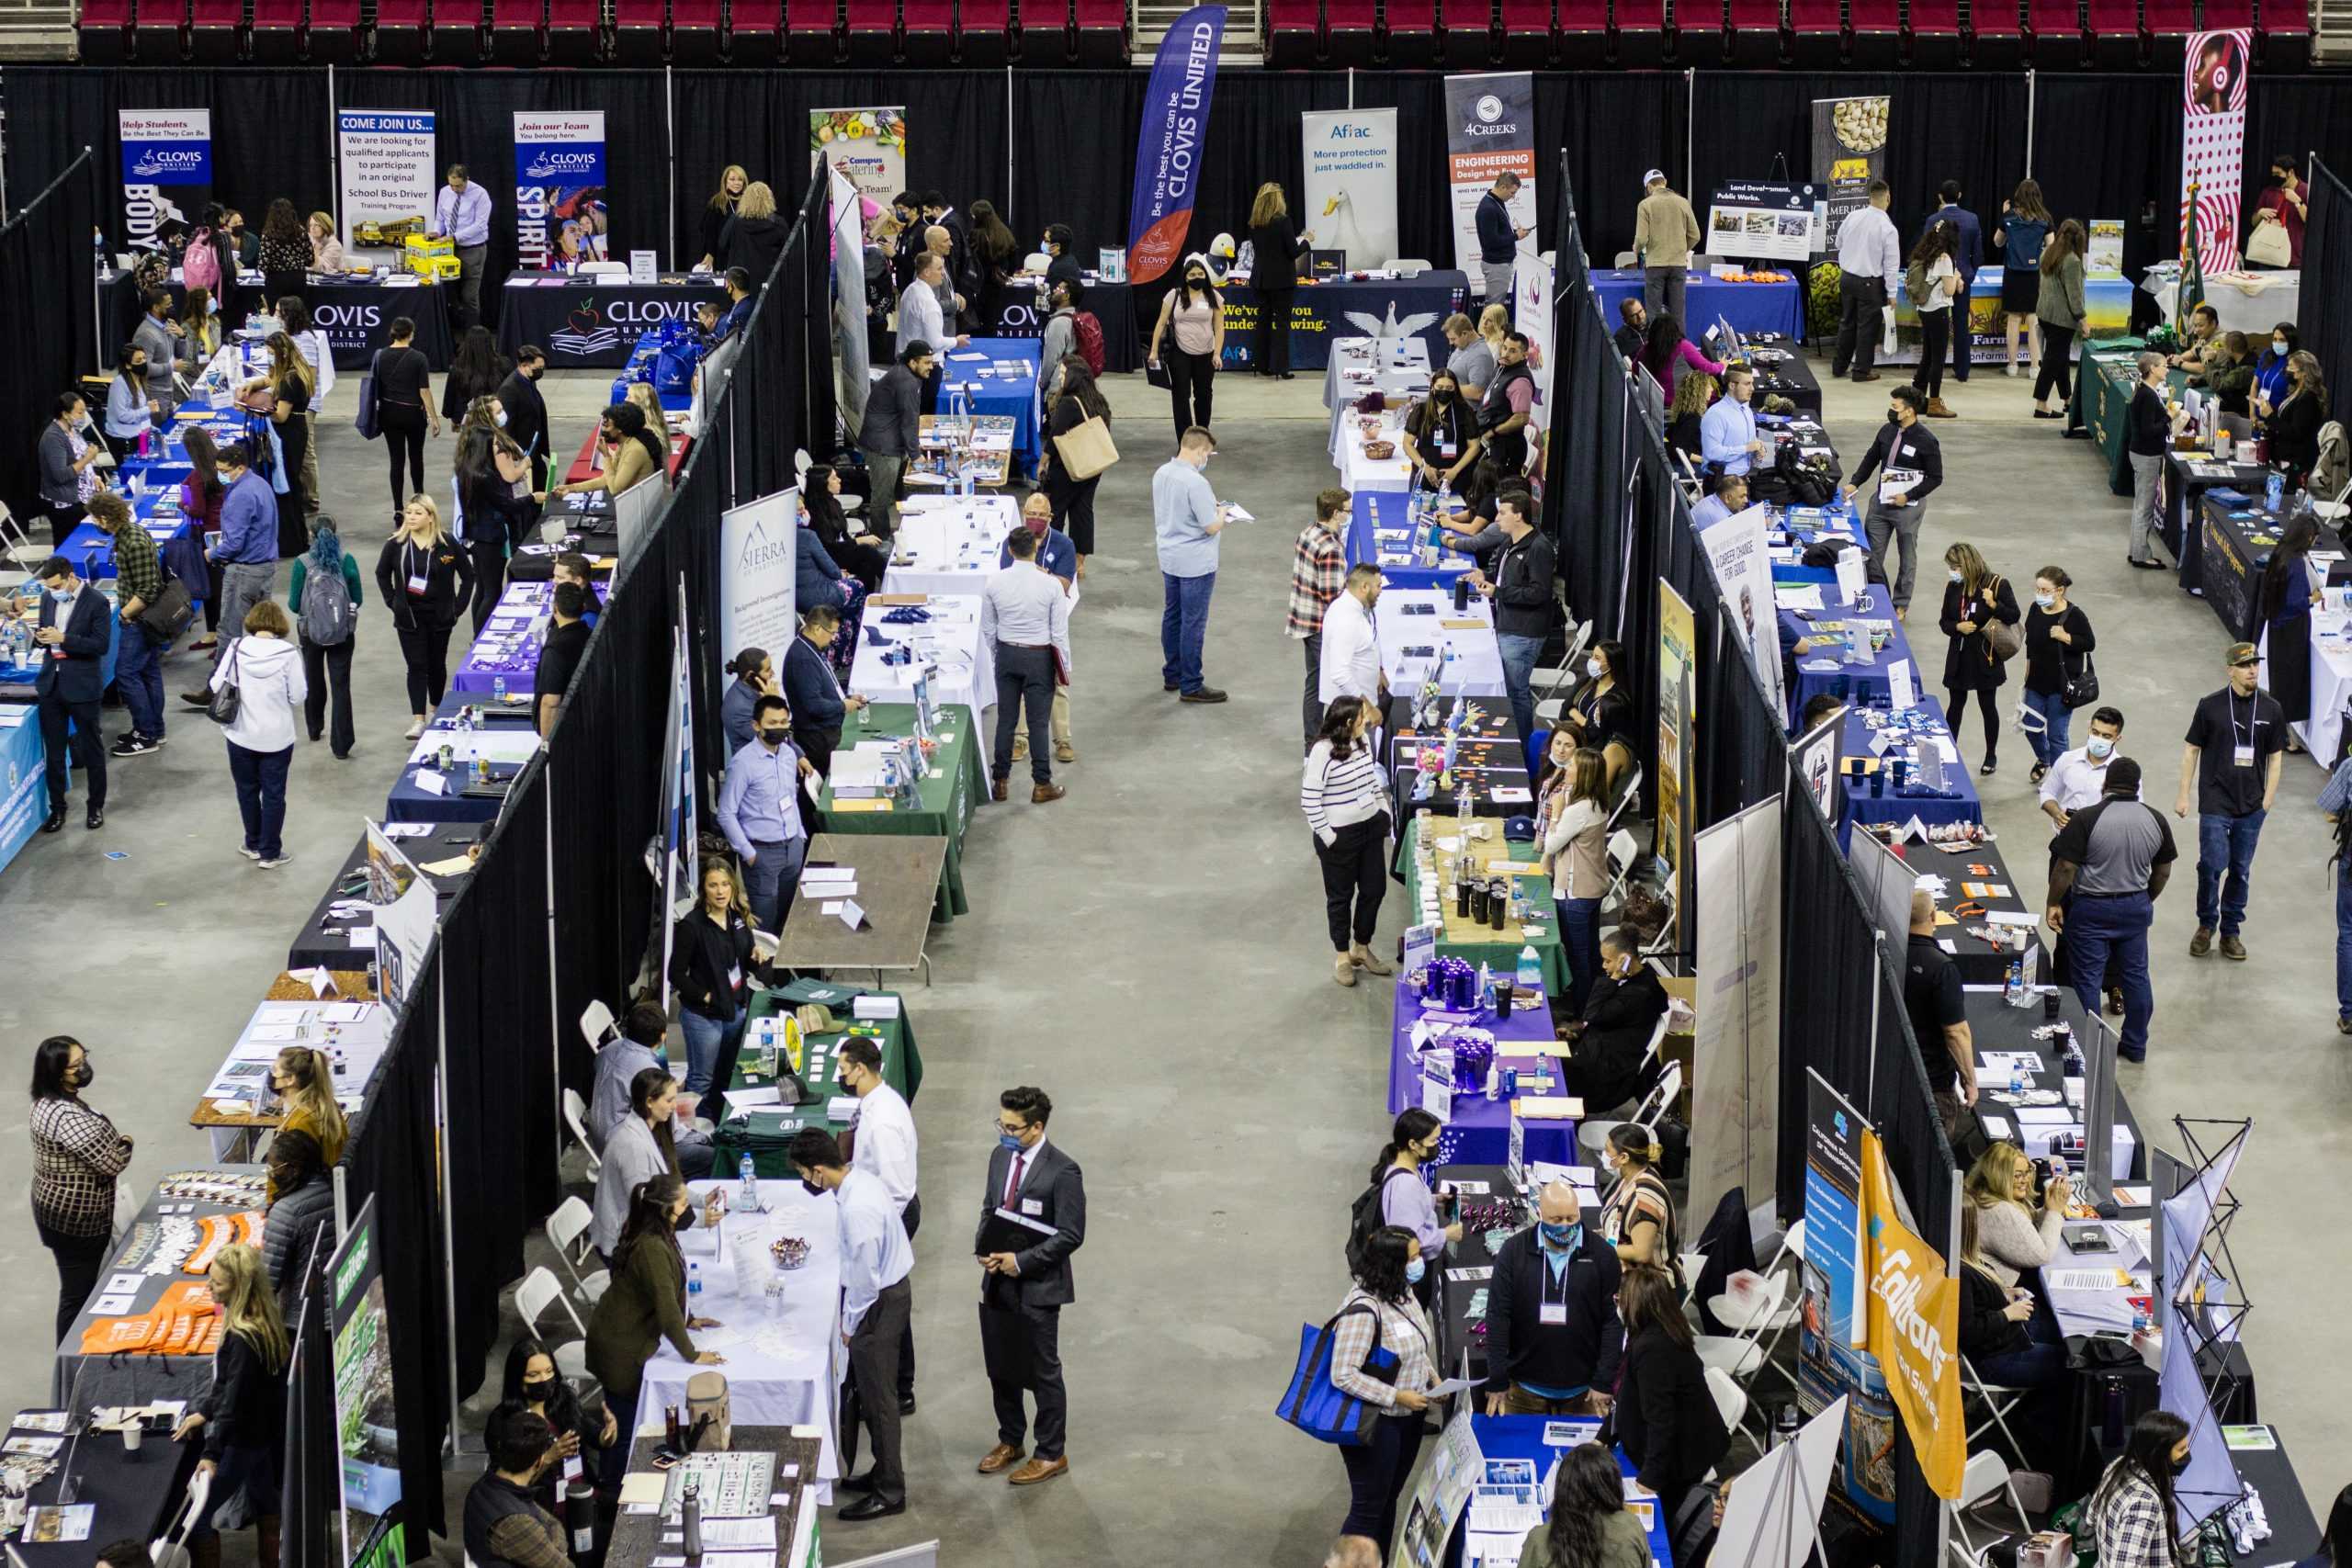 Looking for job opportunities? Here are the career fairs at